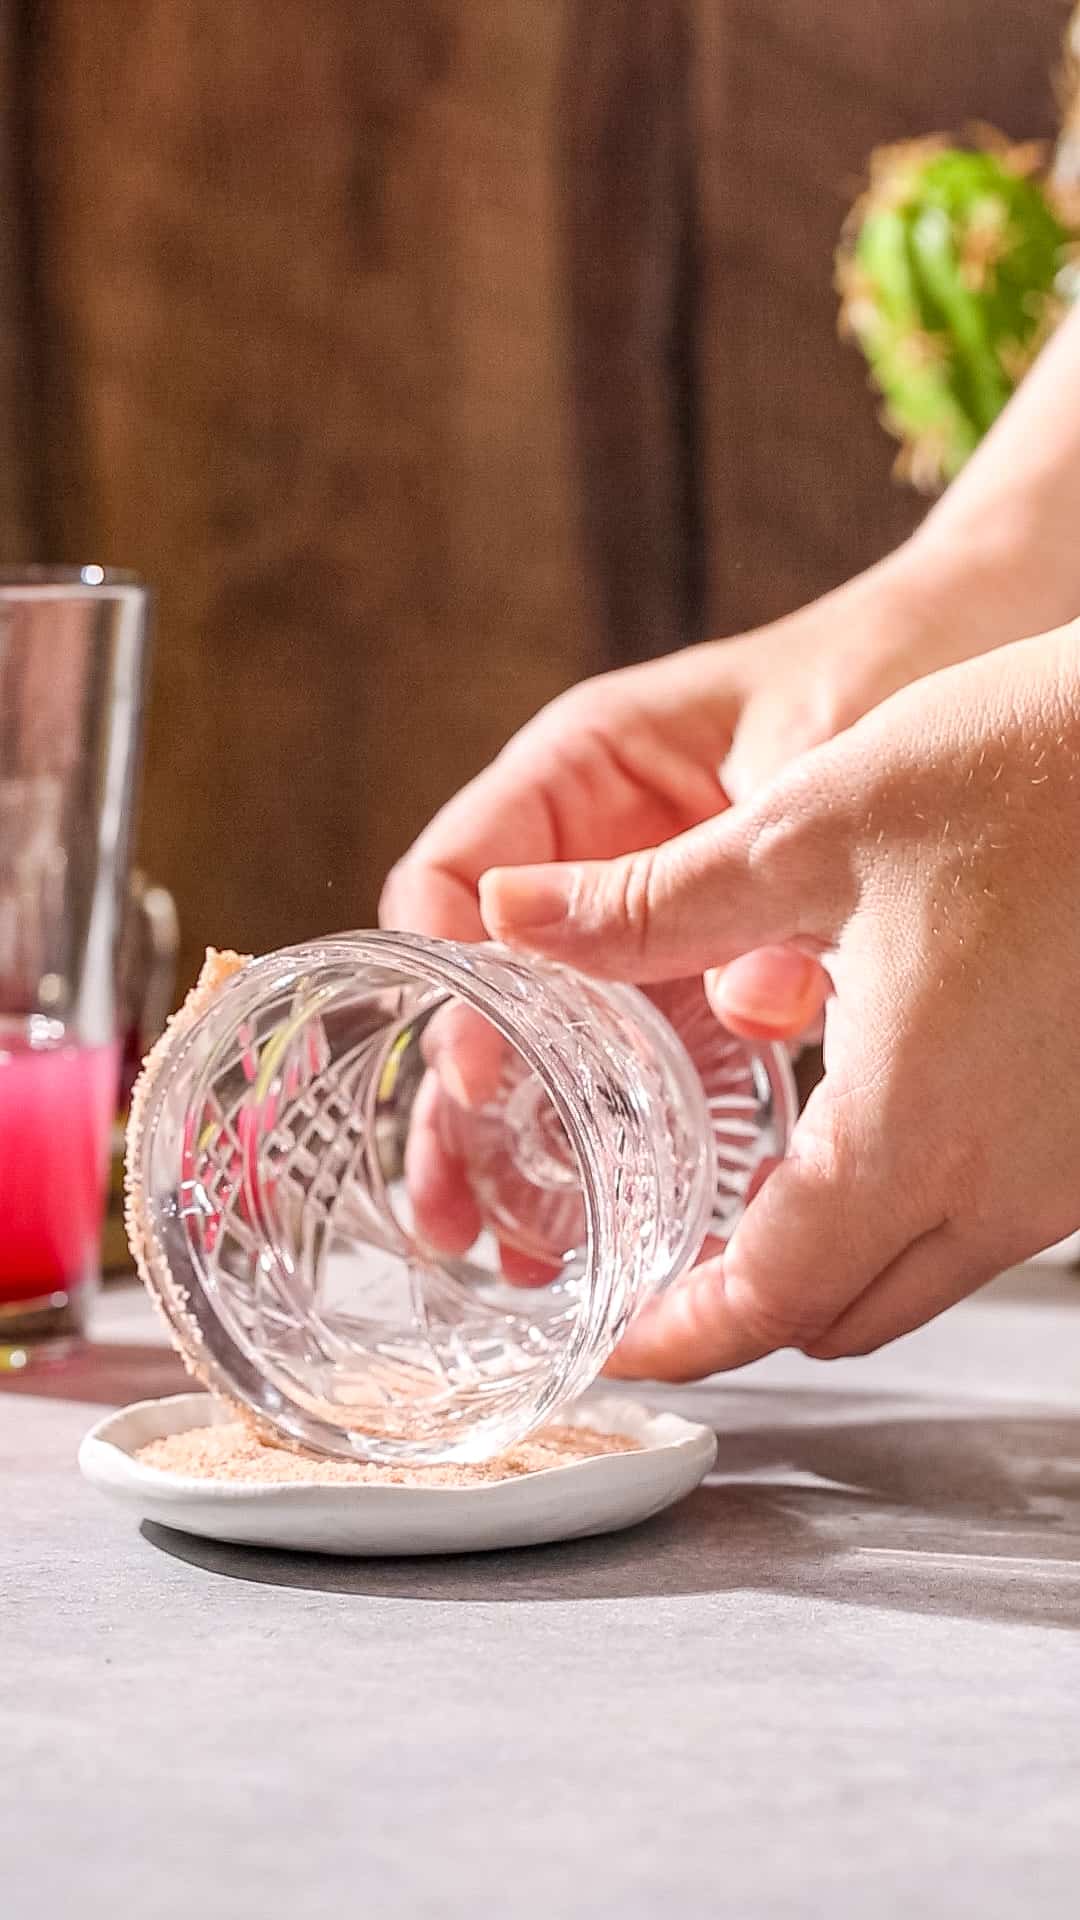 Hands dipping the rim of a cocktail glass into a dish of Himalayan pink salt.